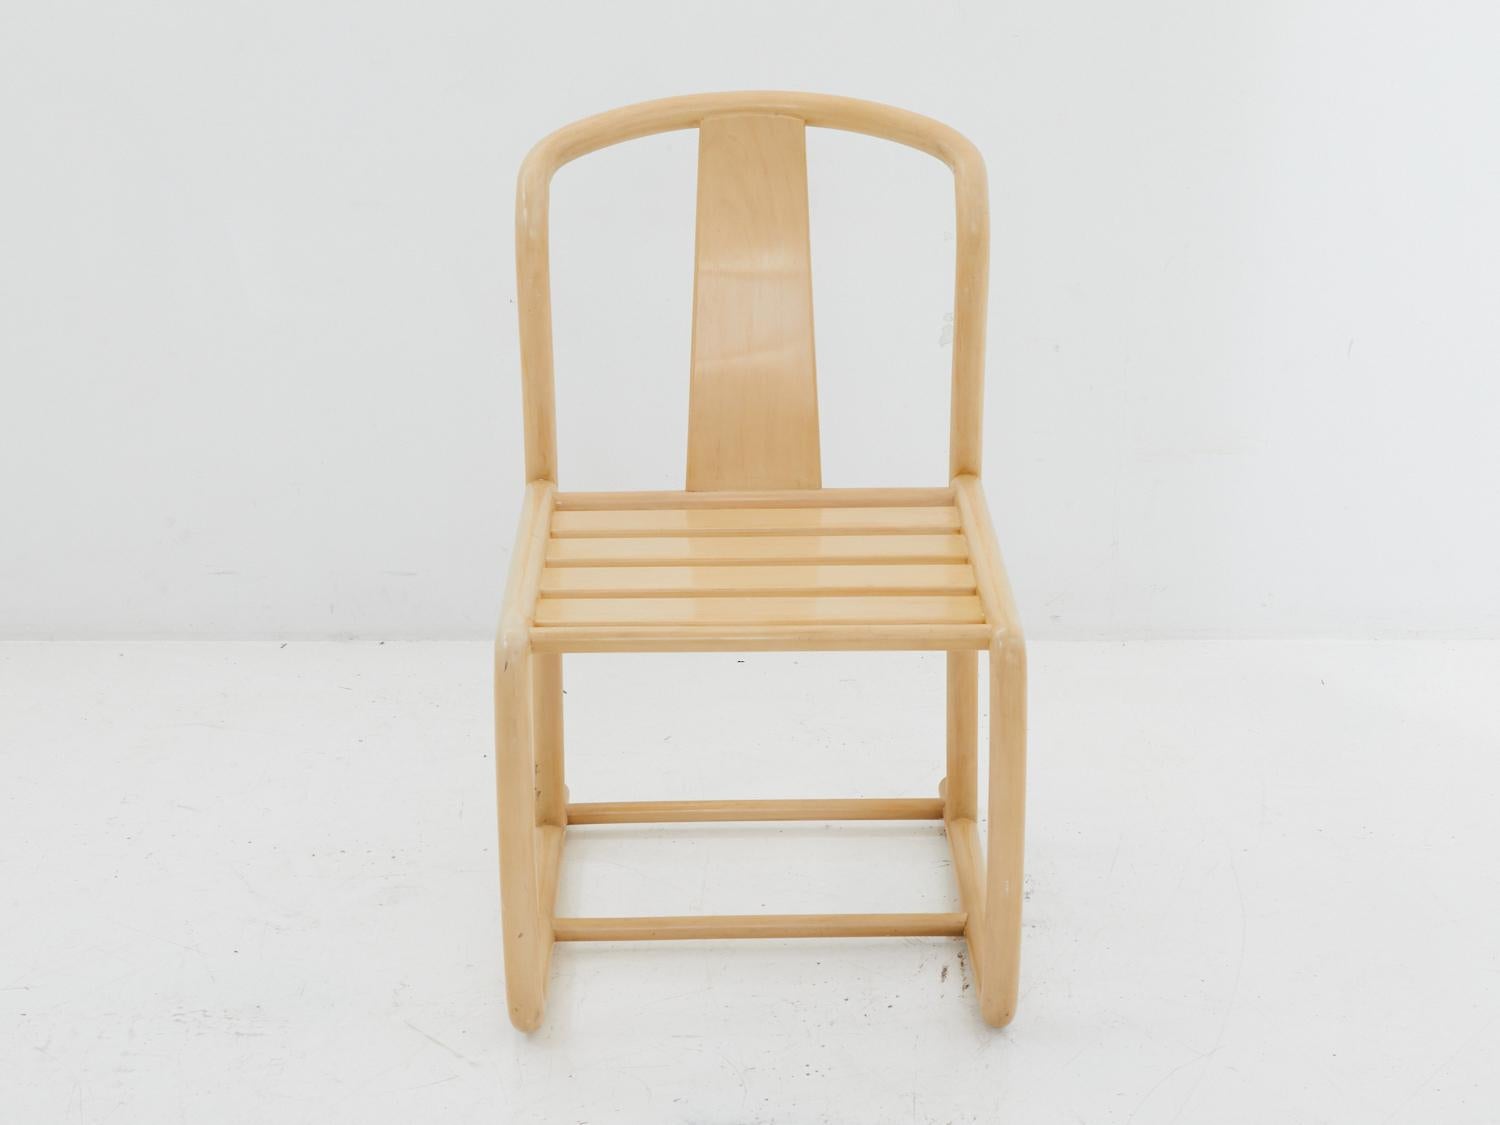 Take a seat in this maple bentwood tubular chair, a true Italian delight crafted by Tecno Furniture. It's modern design and exquisite craftsmanship will make you feel like you're lounging in a chic café in Milan. Bella, stylish, and